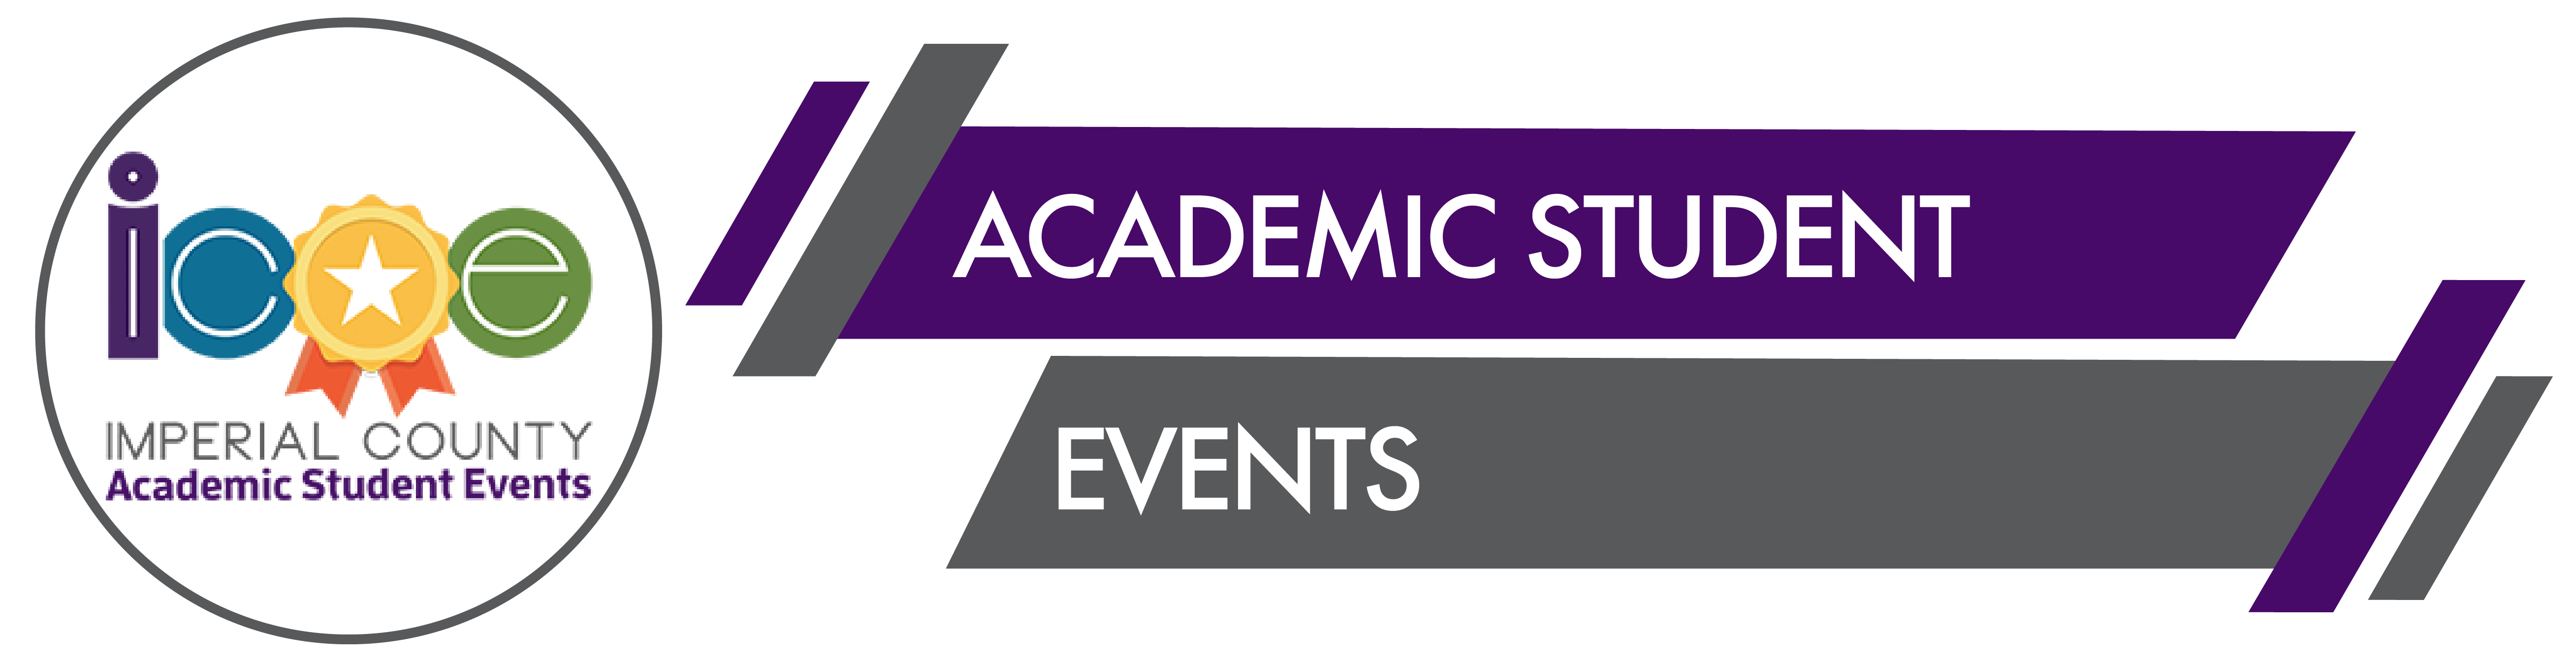 Welcome to Academic Student Events Banner